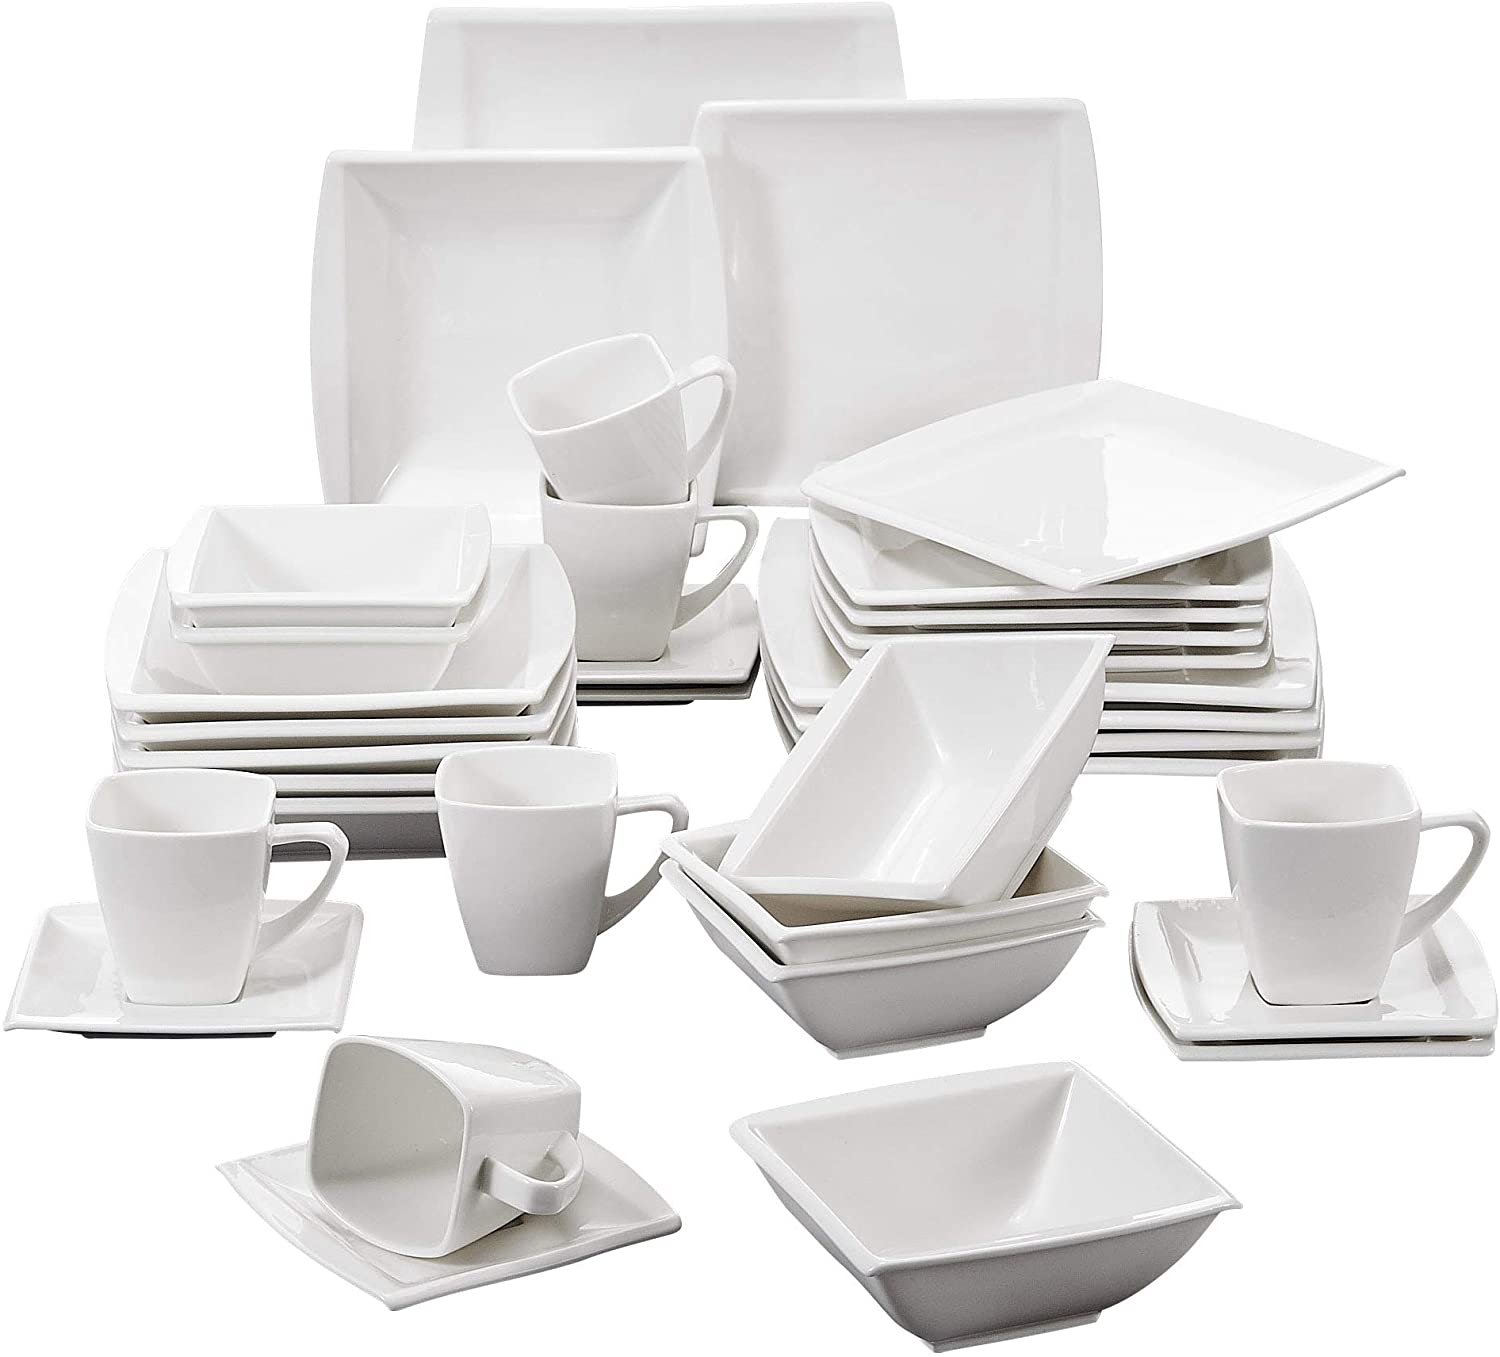 MALACASA, Blance Series 36 Pieces Cream White Porcelain Dinner Service Coffee Service with Cereal Peels for 6 People